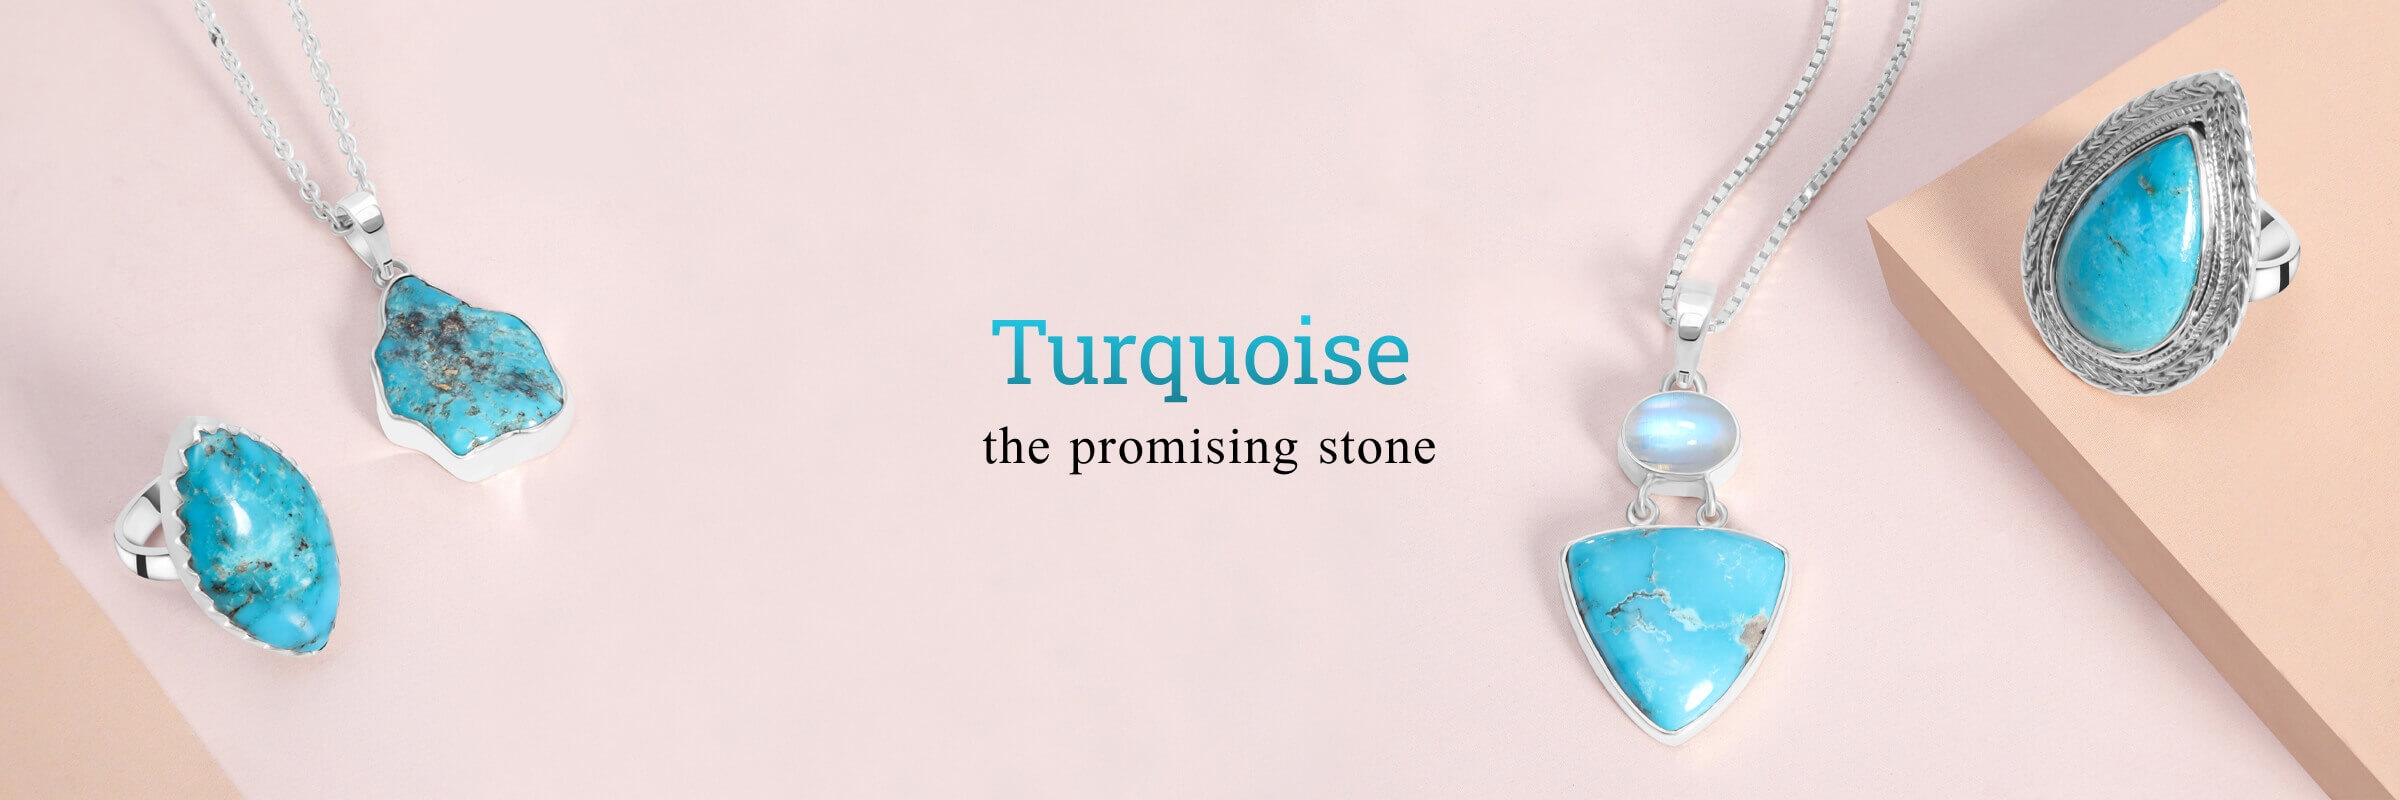 Turquoise - the promising stone